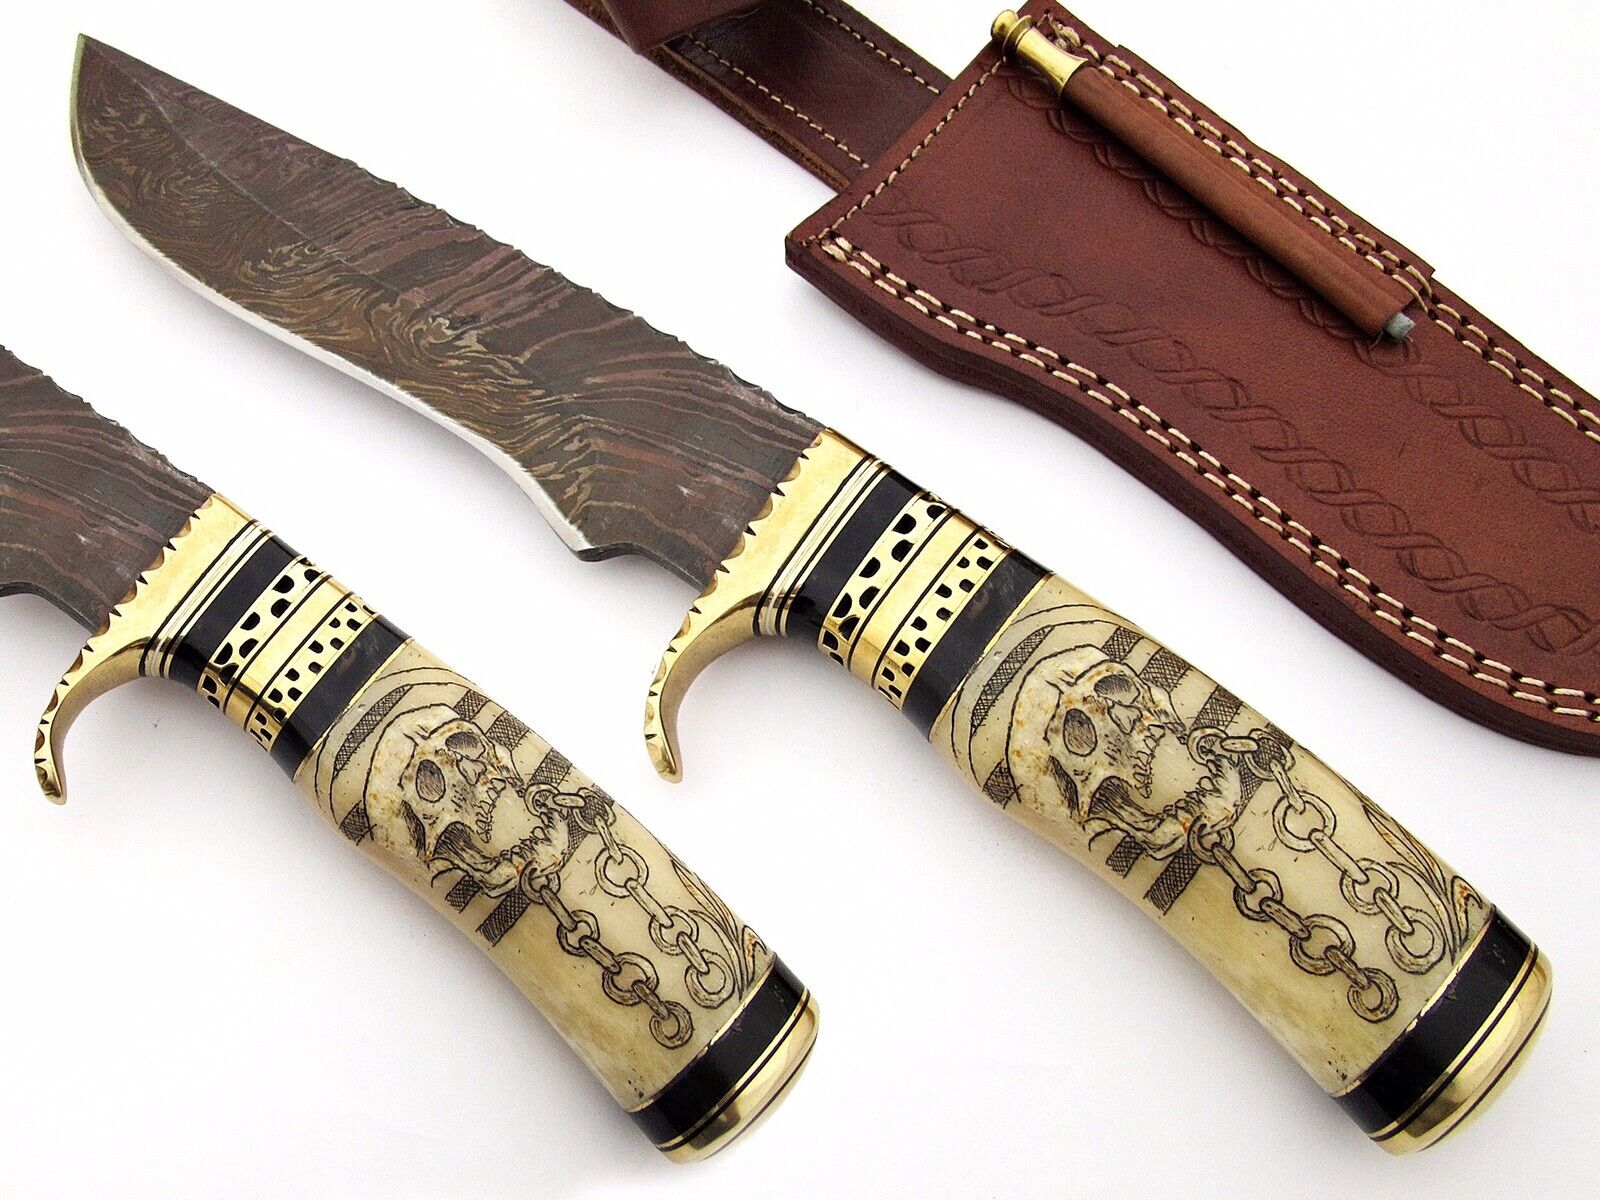 CUSTOM HAND MADE DAMASCUS STEEL FIX BLADE BOWING KNIFE(13.50”OVERALL).